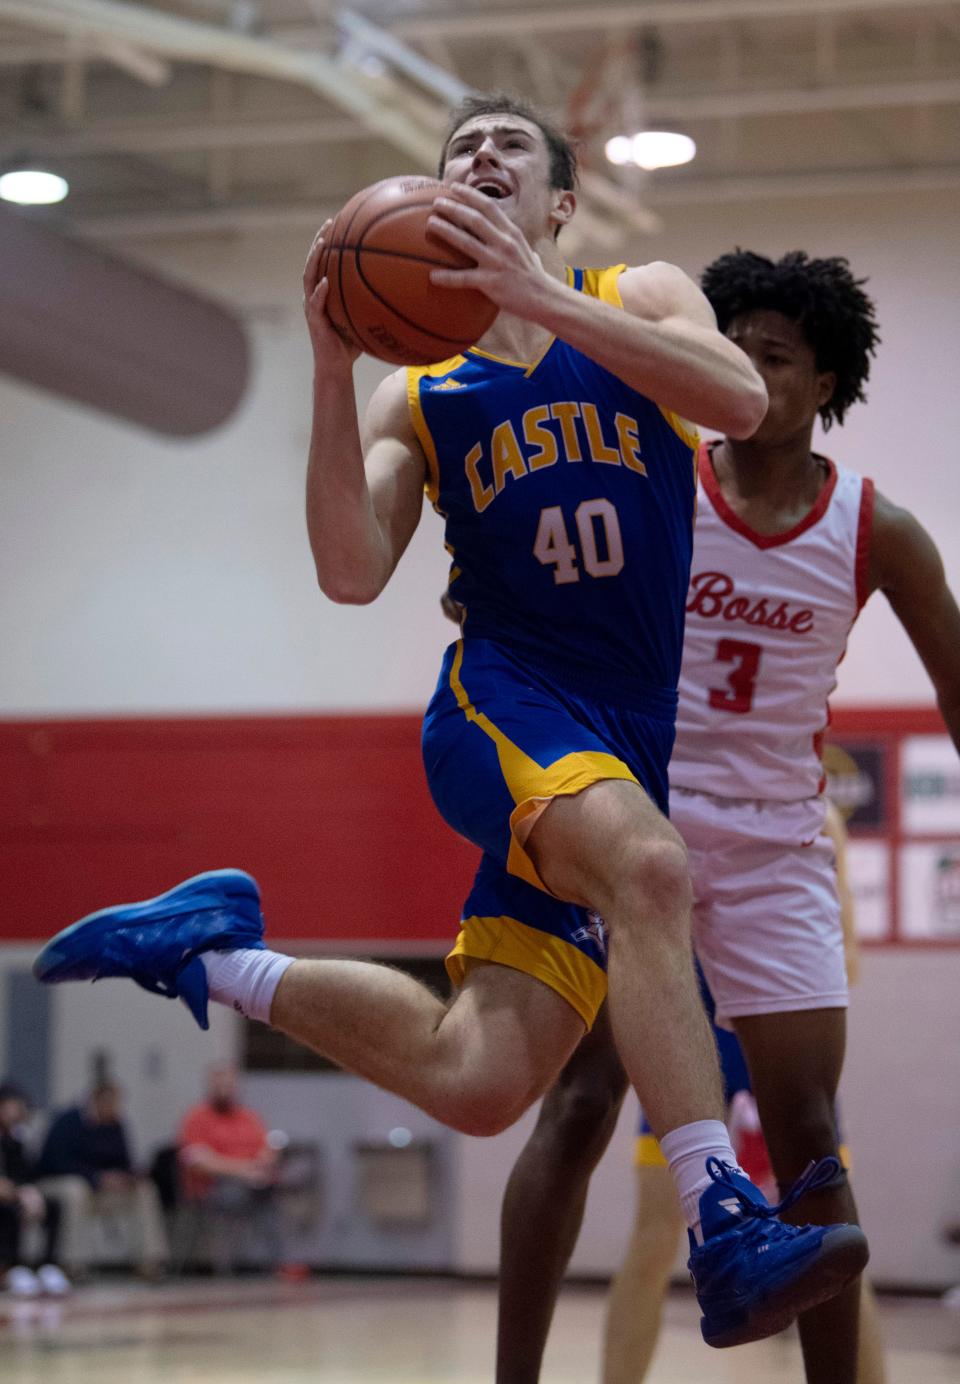 Castle's Weston Aigner (40) shoots while guarded by Bosse's Elijah Wagner (3) during their game at Bosse High School Thursday night, Feb. 2, 2023.